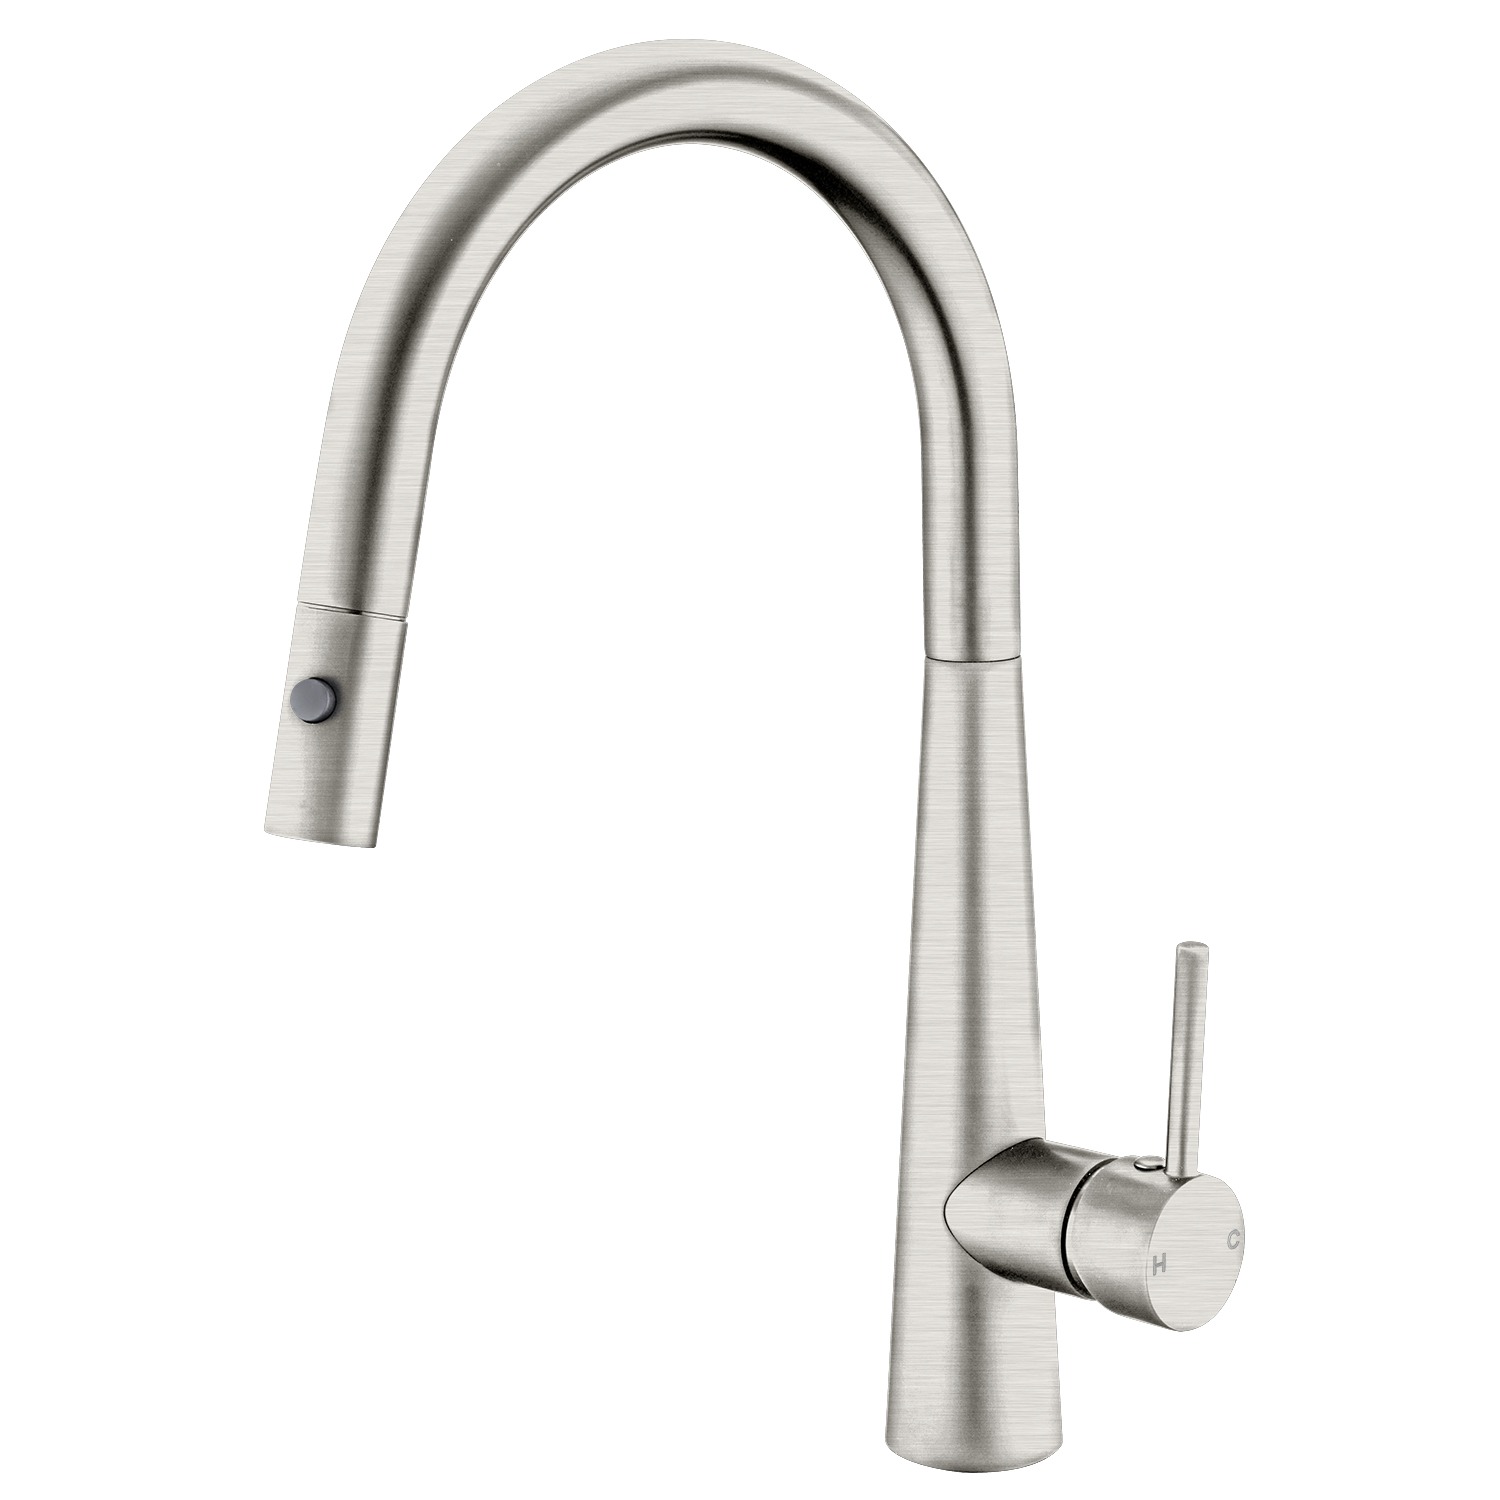 Nero Dolce Pull Out Sink Mixer with Vegie Spray Brushed Nickel